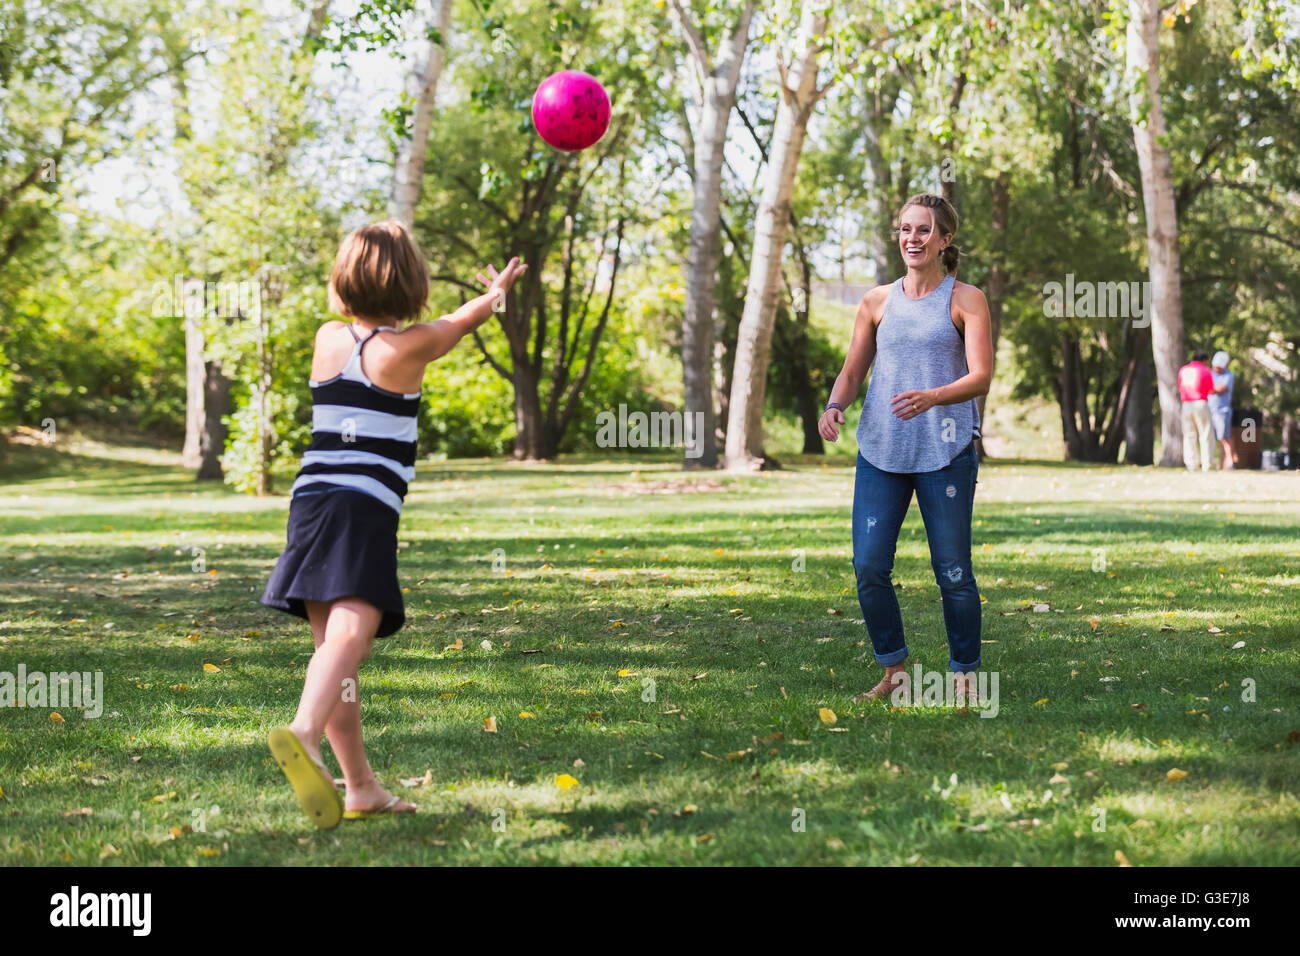 Mother and daughter throwing a ball in a park during a family outing; Edmonton, Alberta, Canada Stock Photo